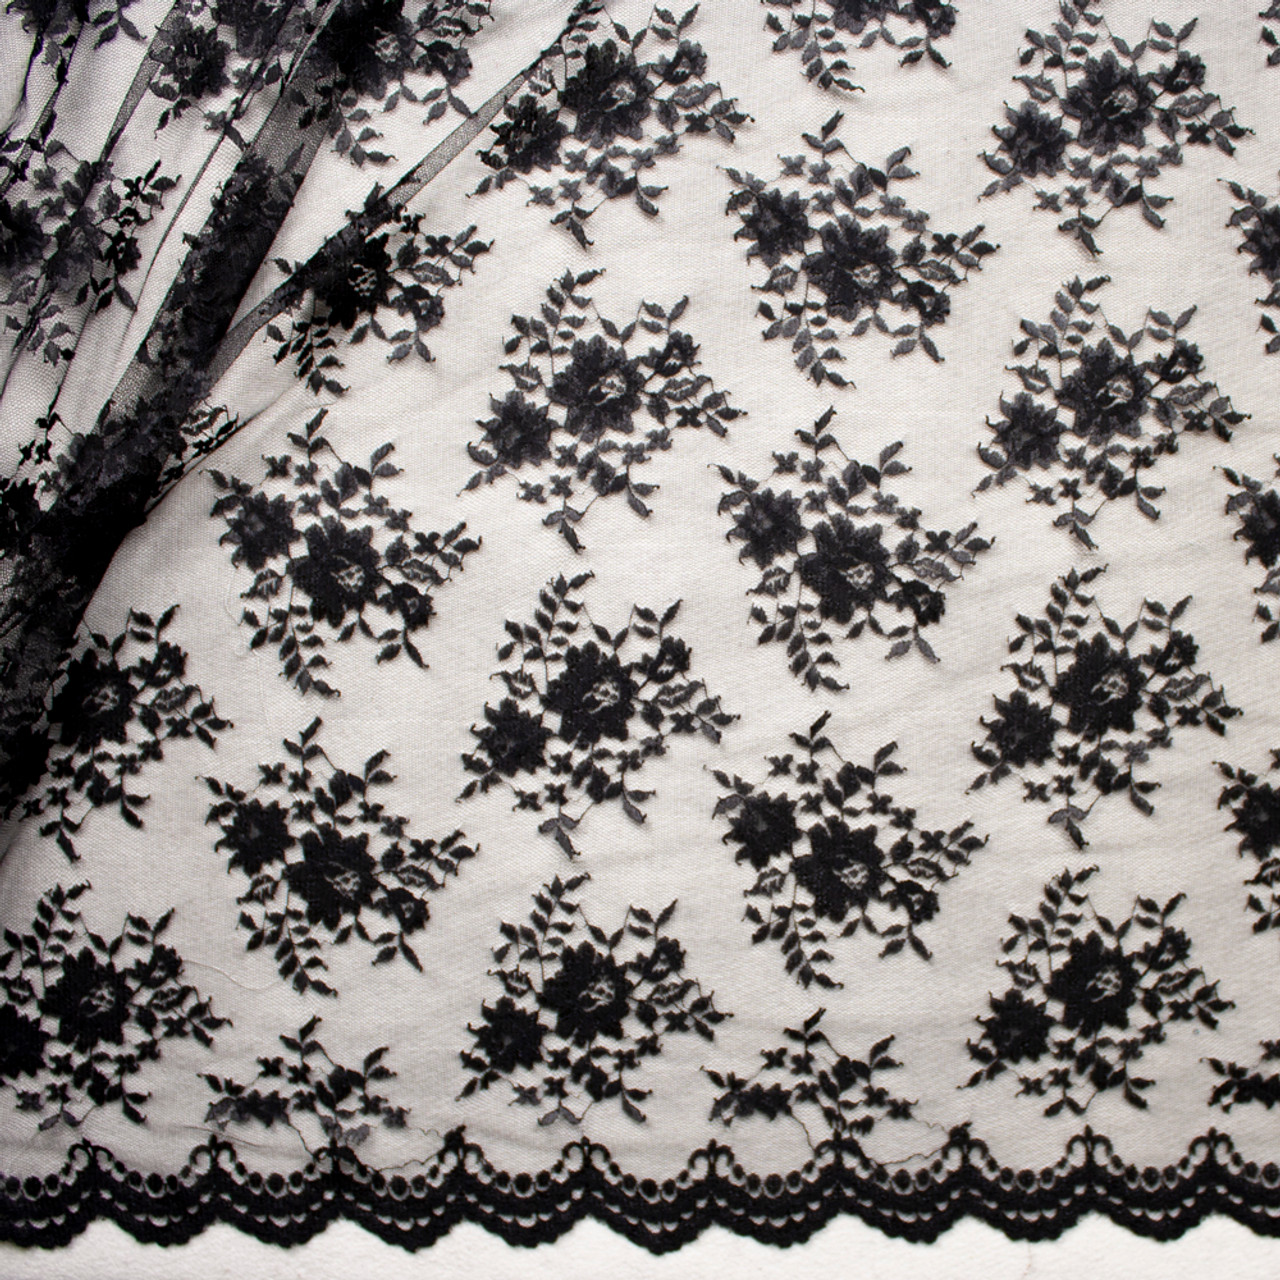 Black Silk Chantilly Lace Fabric: 100% Silk Fabrics from Italy by